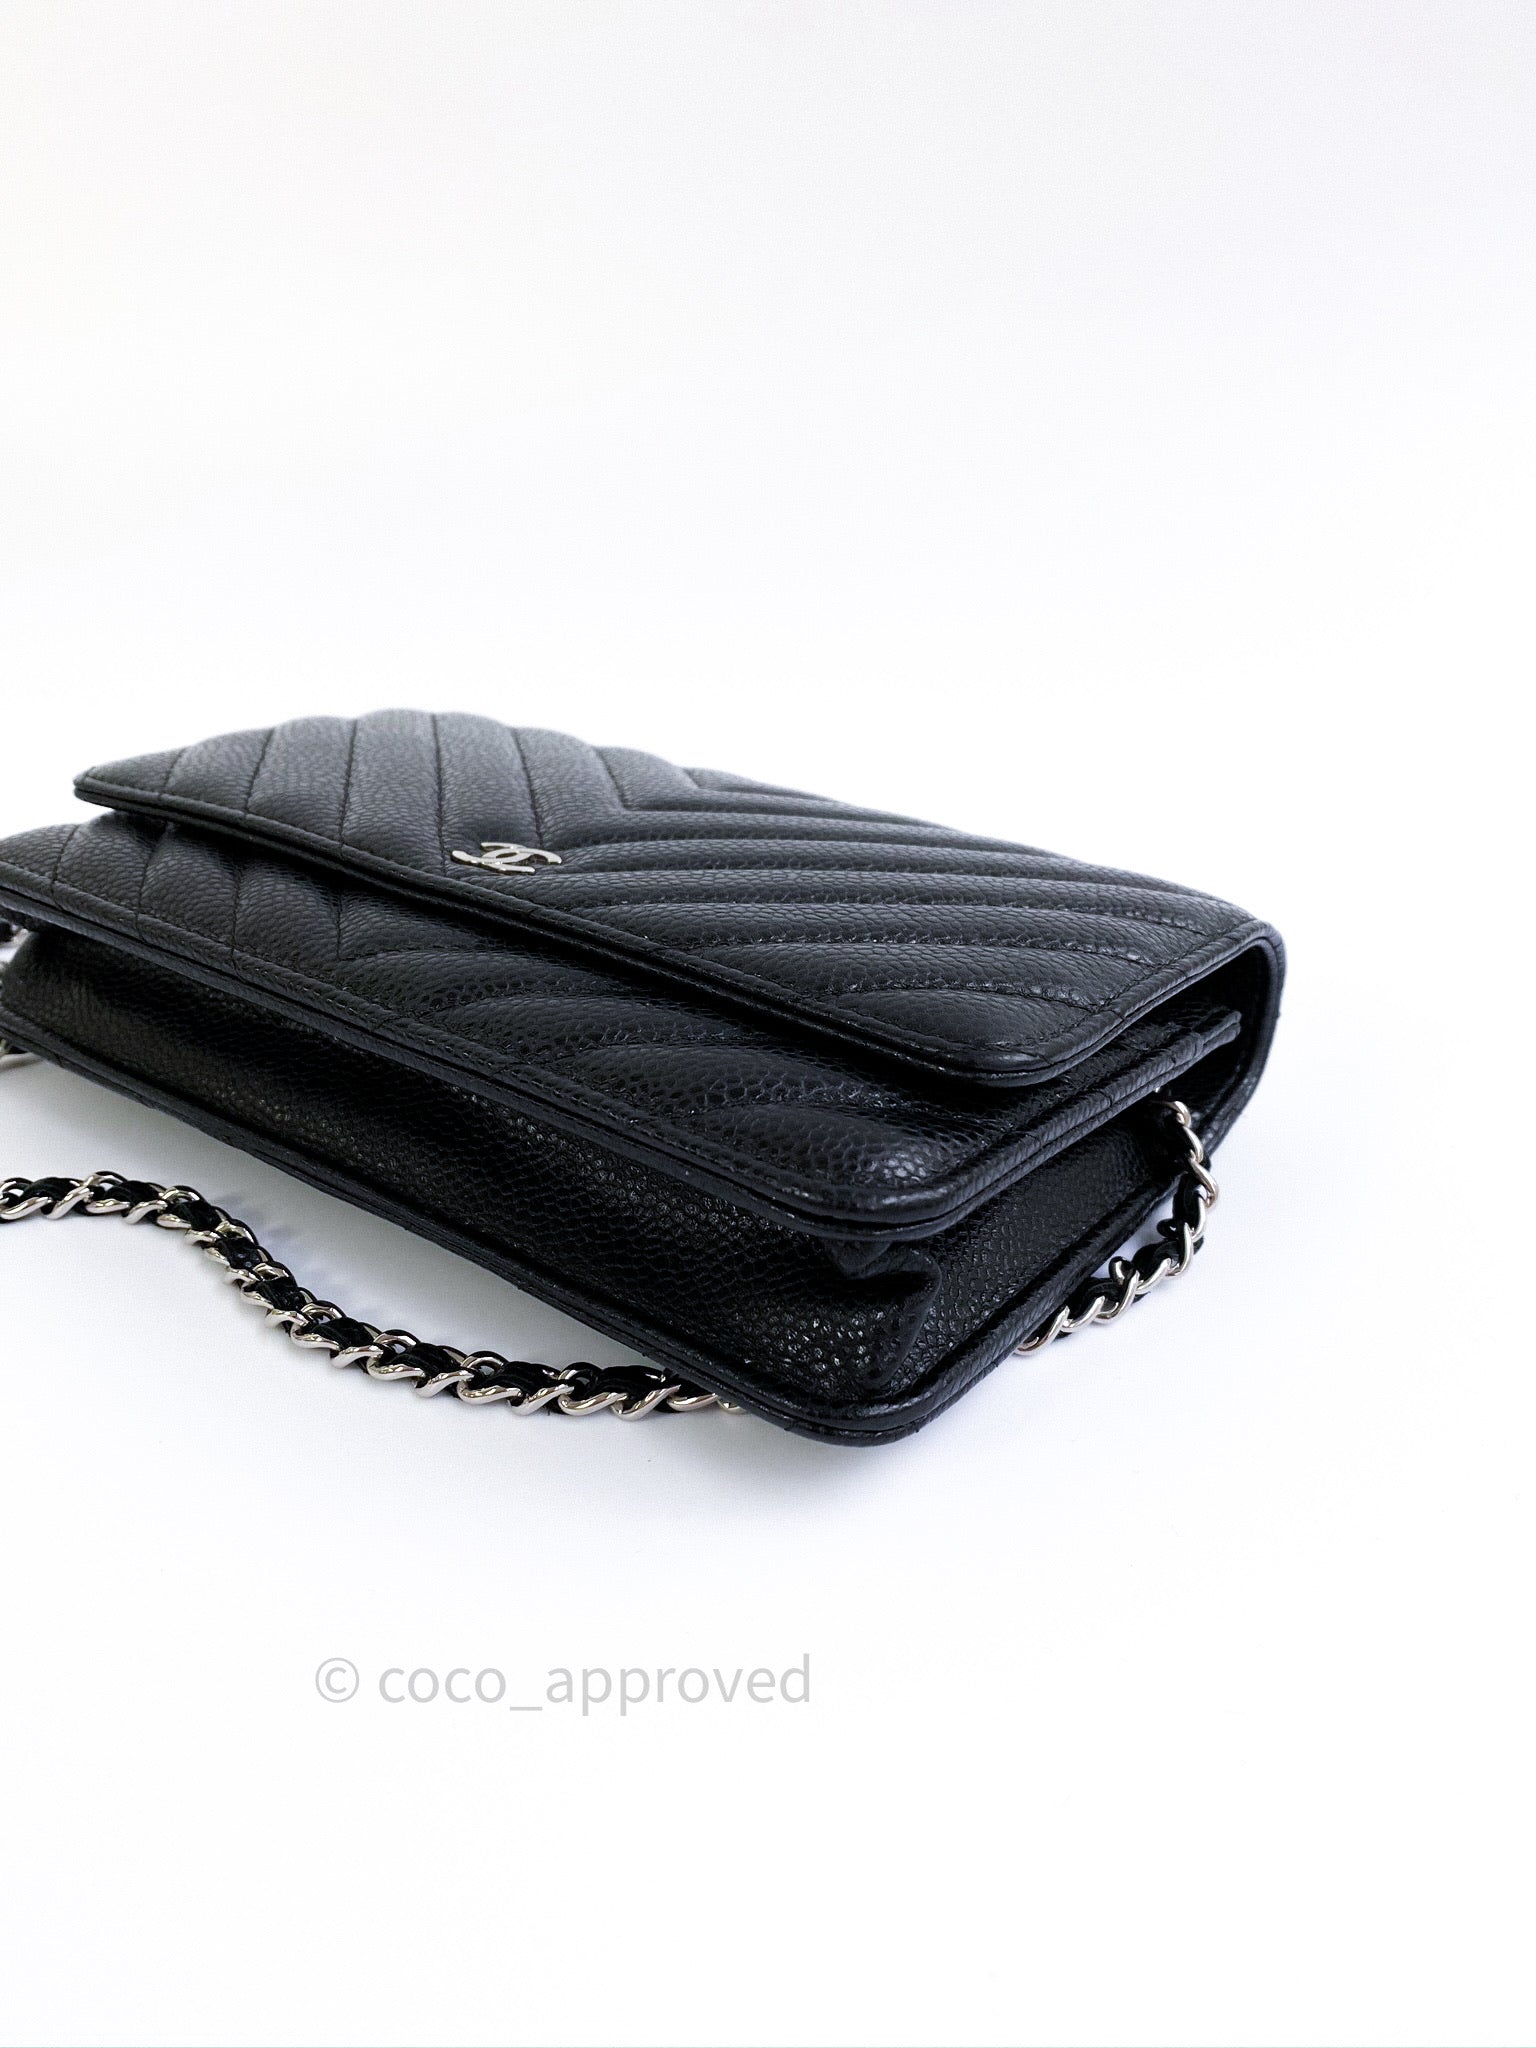 Chanel Timeless Caviar Wallet on Chain